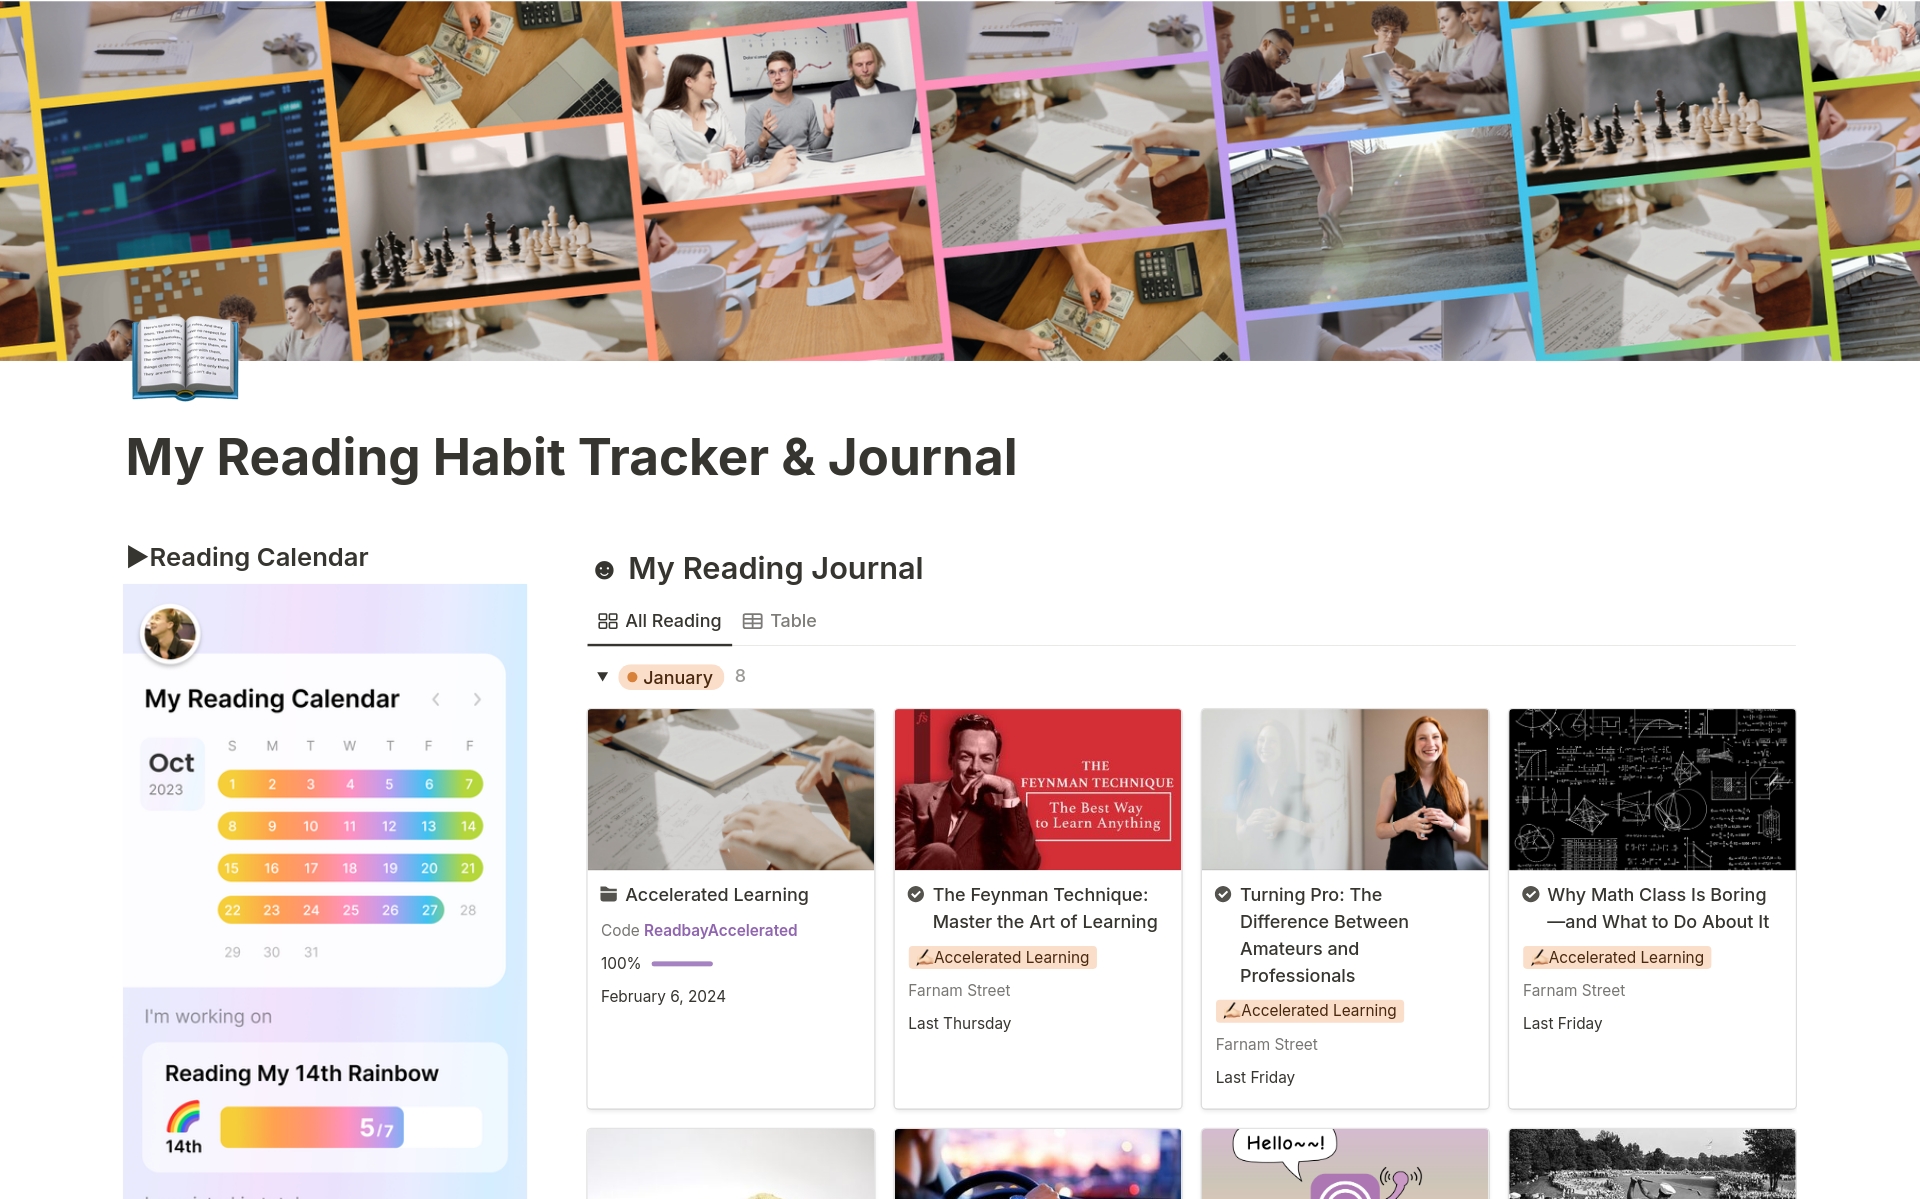 Exploring diverse themes monthly expands horizons. Daily journaling and automatic reading progress sync keep you engaged, ensuring a fulfilling reading journey and steady commitment.